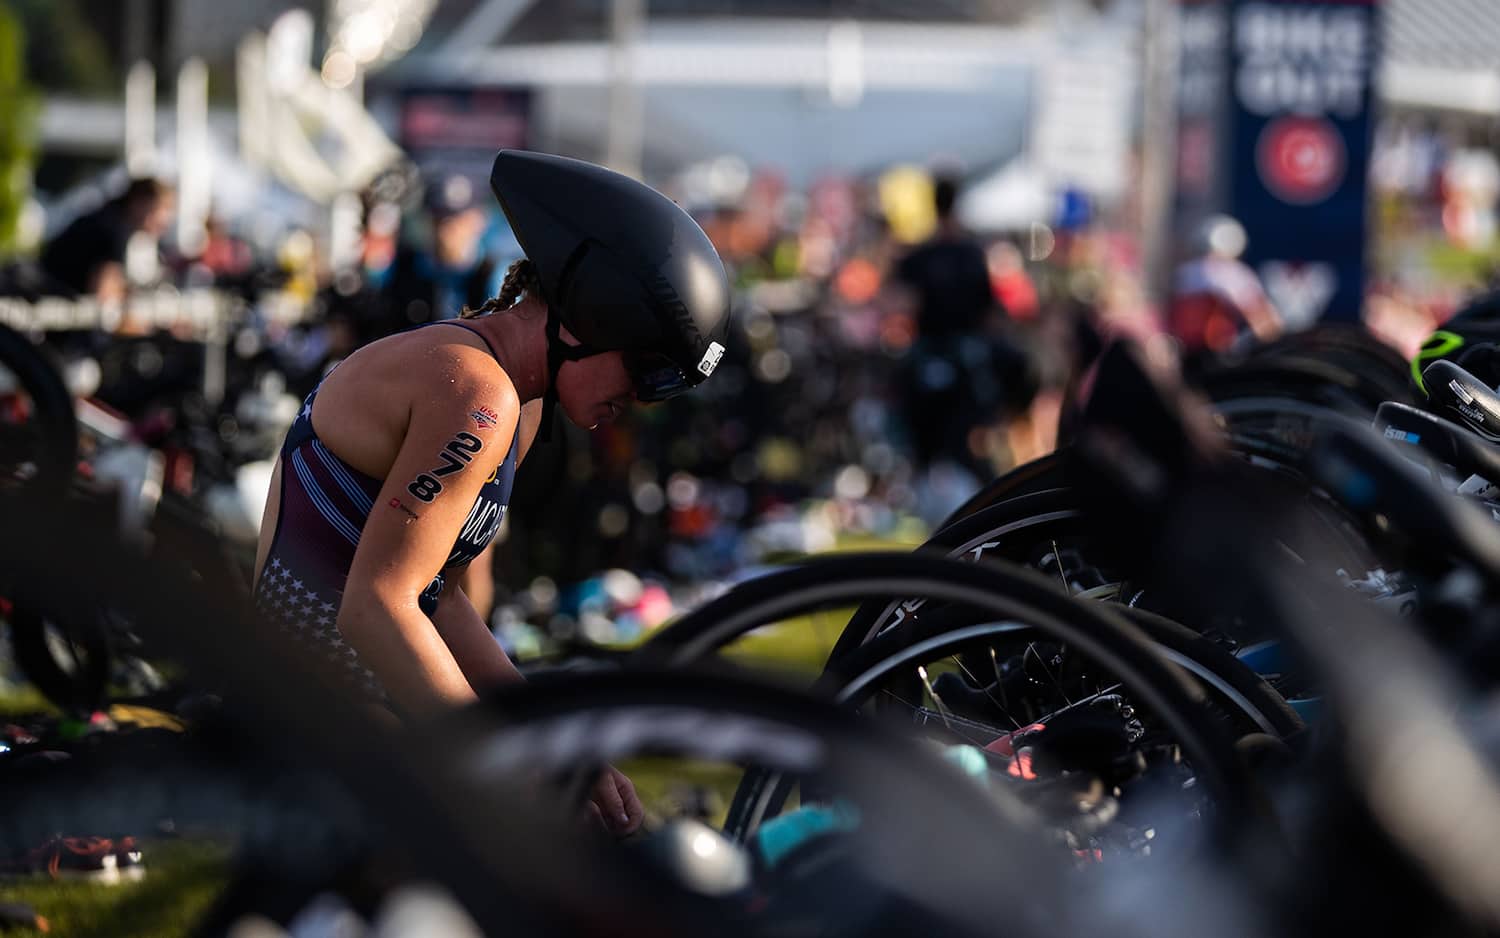 An athlete, wearing a helmet, readies herself for the cycling portion of a race in the transition area.